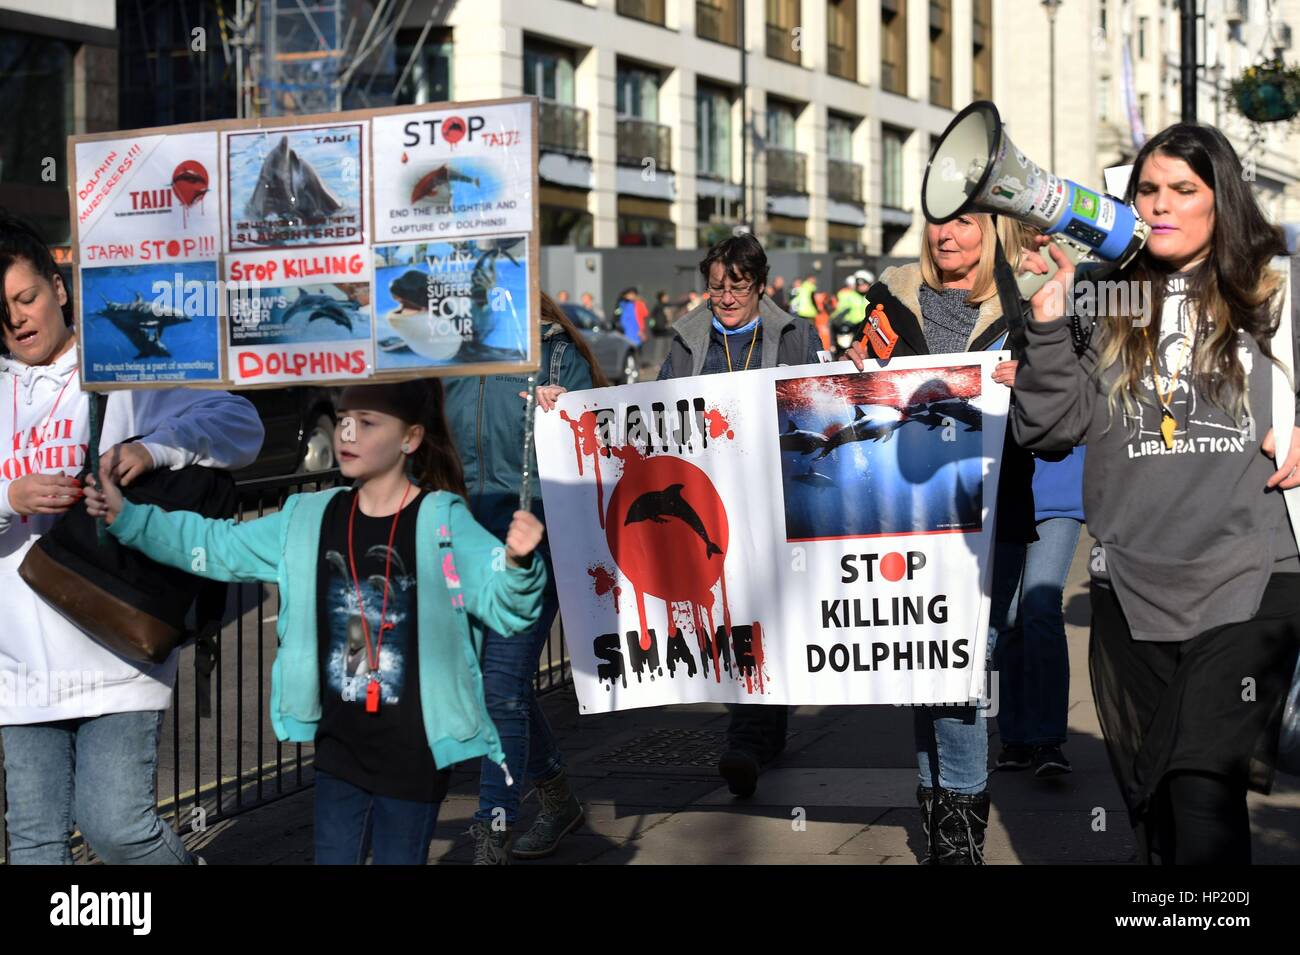 Protestors march through Green Park in London, against Dolphin killing and captivity in Taiji in Japan. Stock Photo